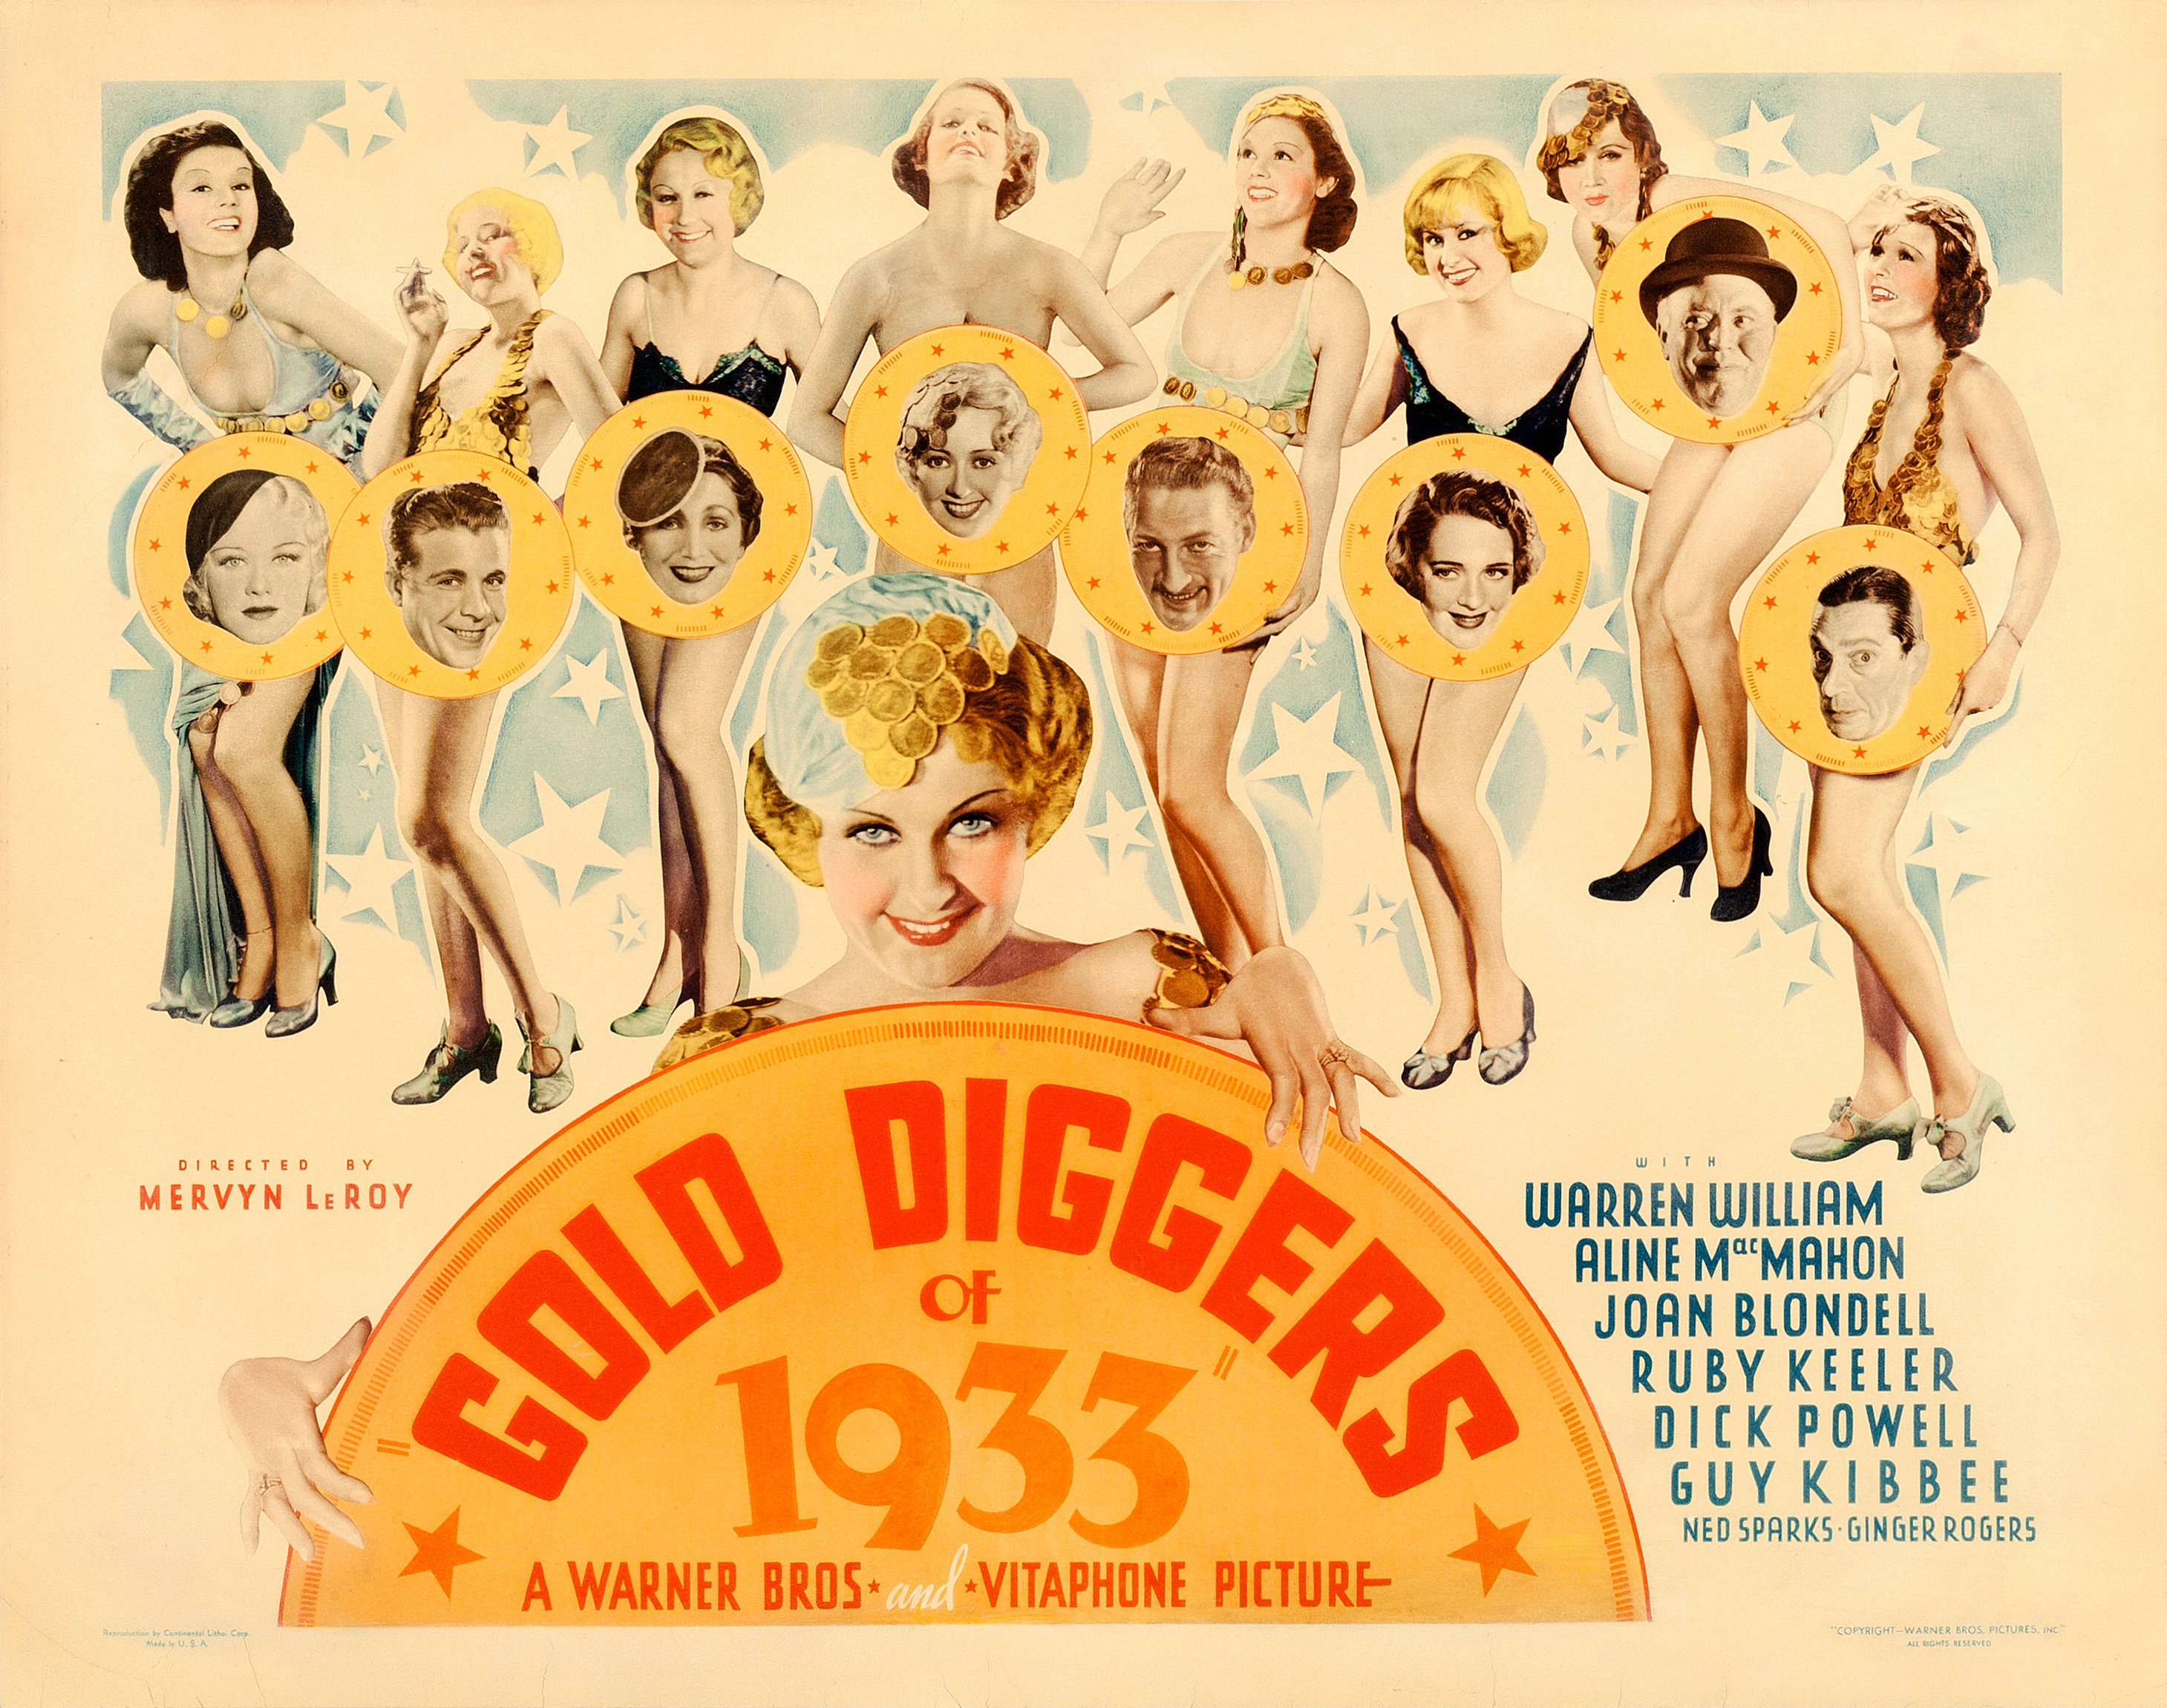 Remember My Forgotten Man” from “Golddiggers of 1933” (1933